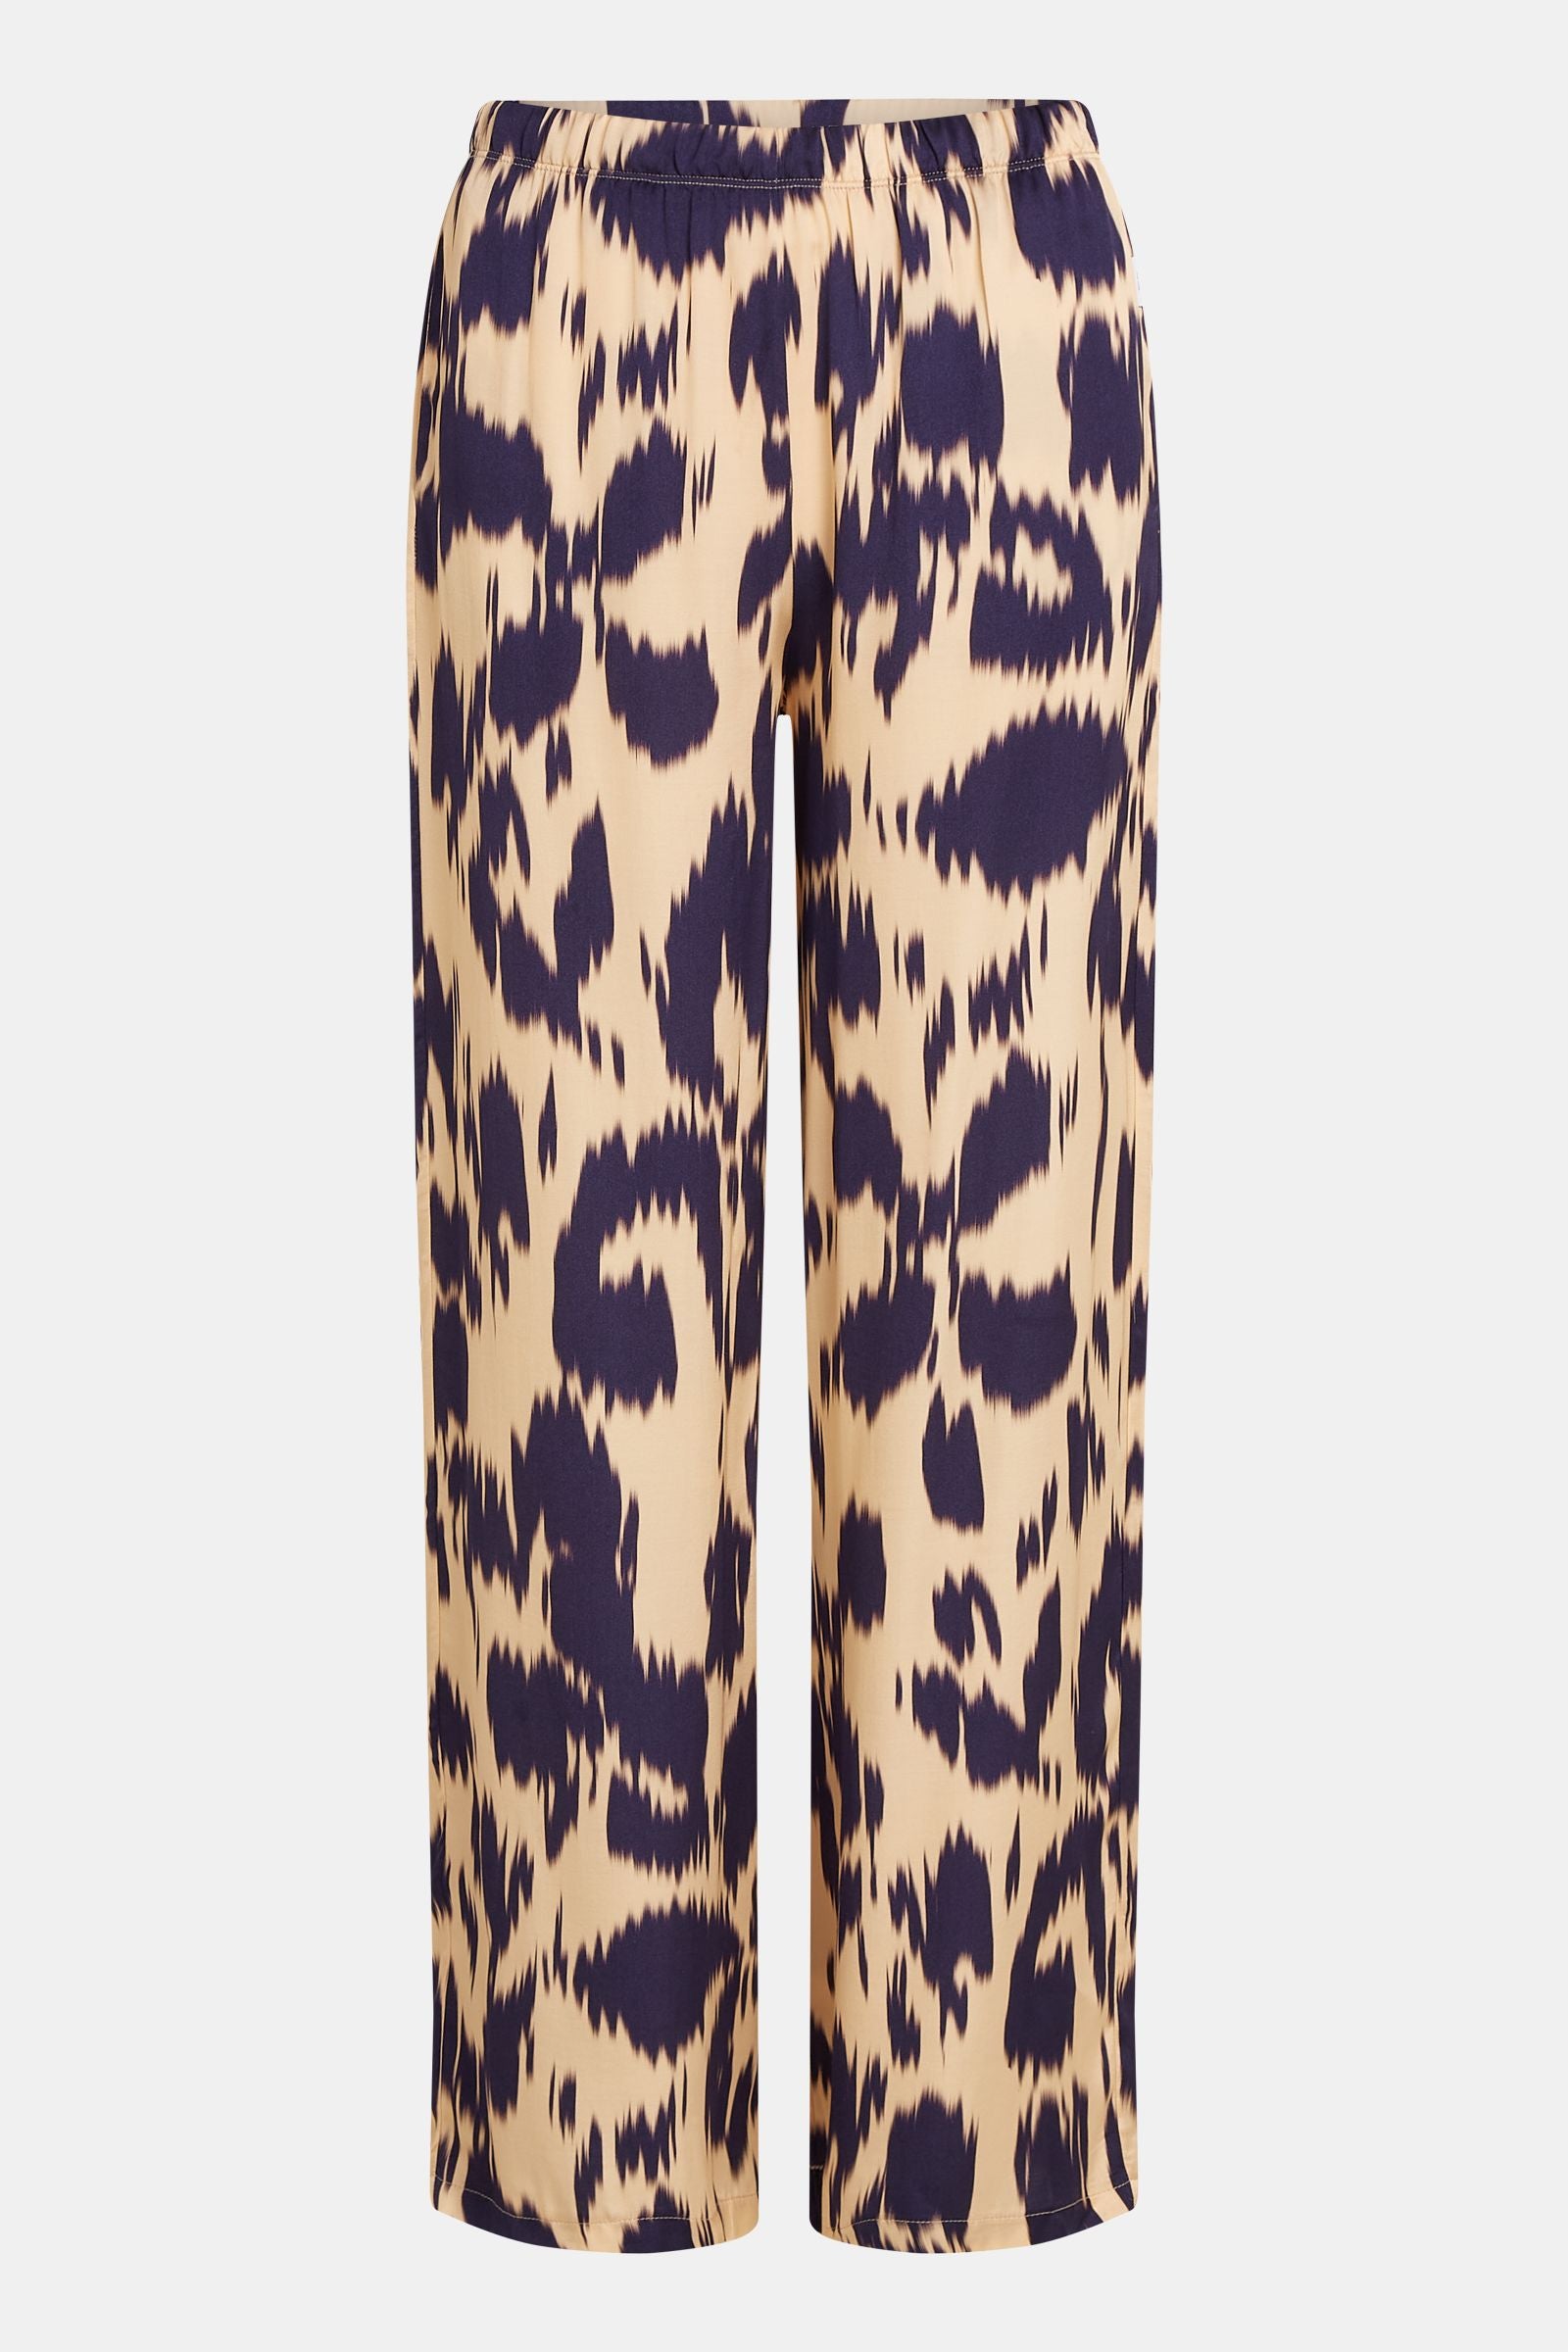 ALL OVER PRINT TROUSERS (S24F1434) SAND - PURPLE